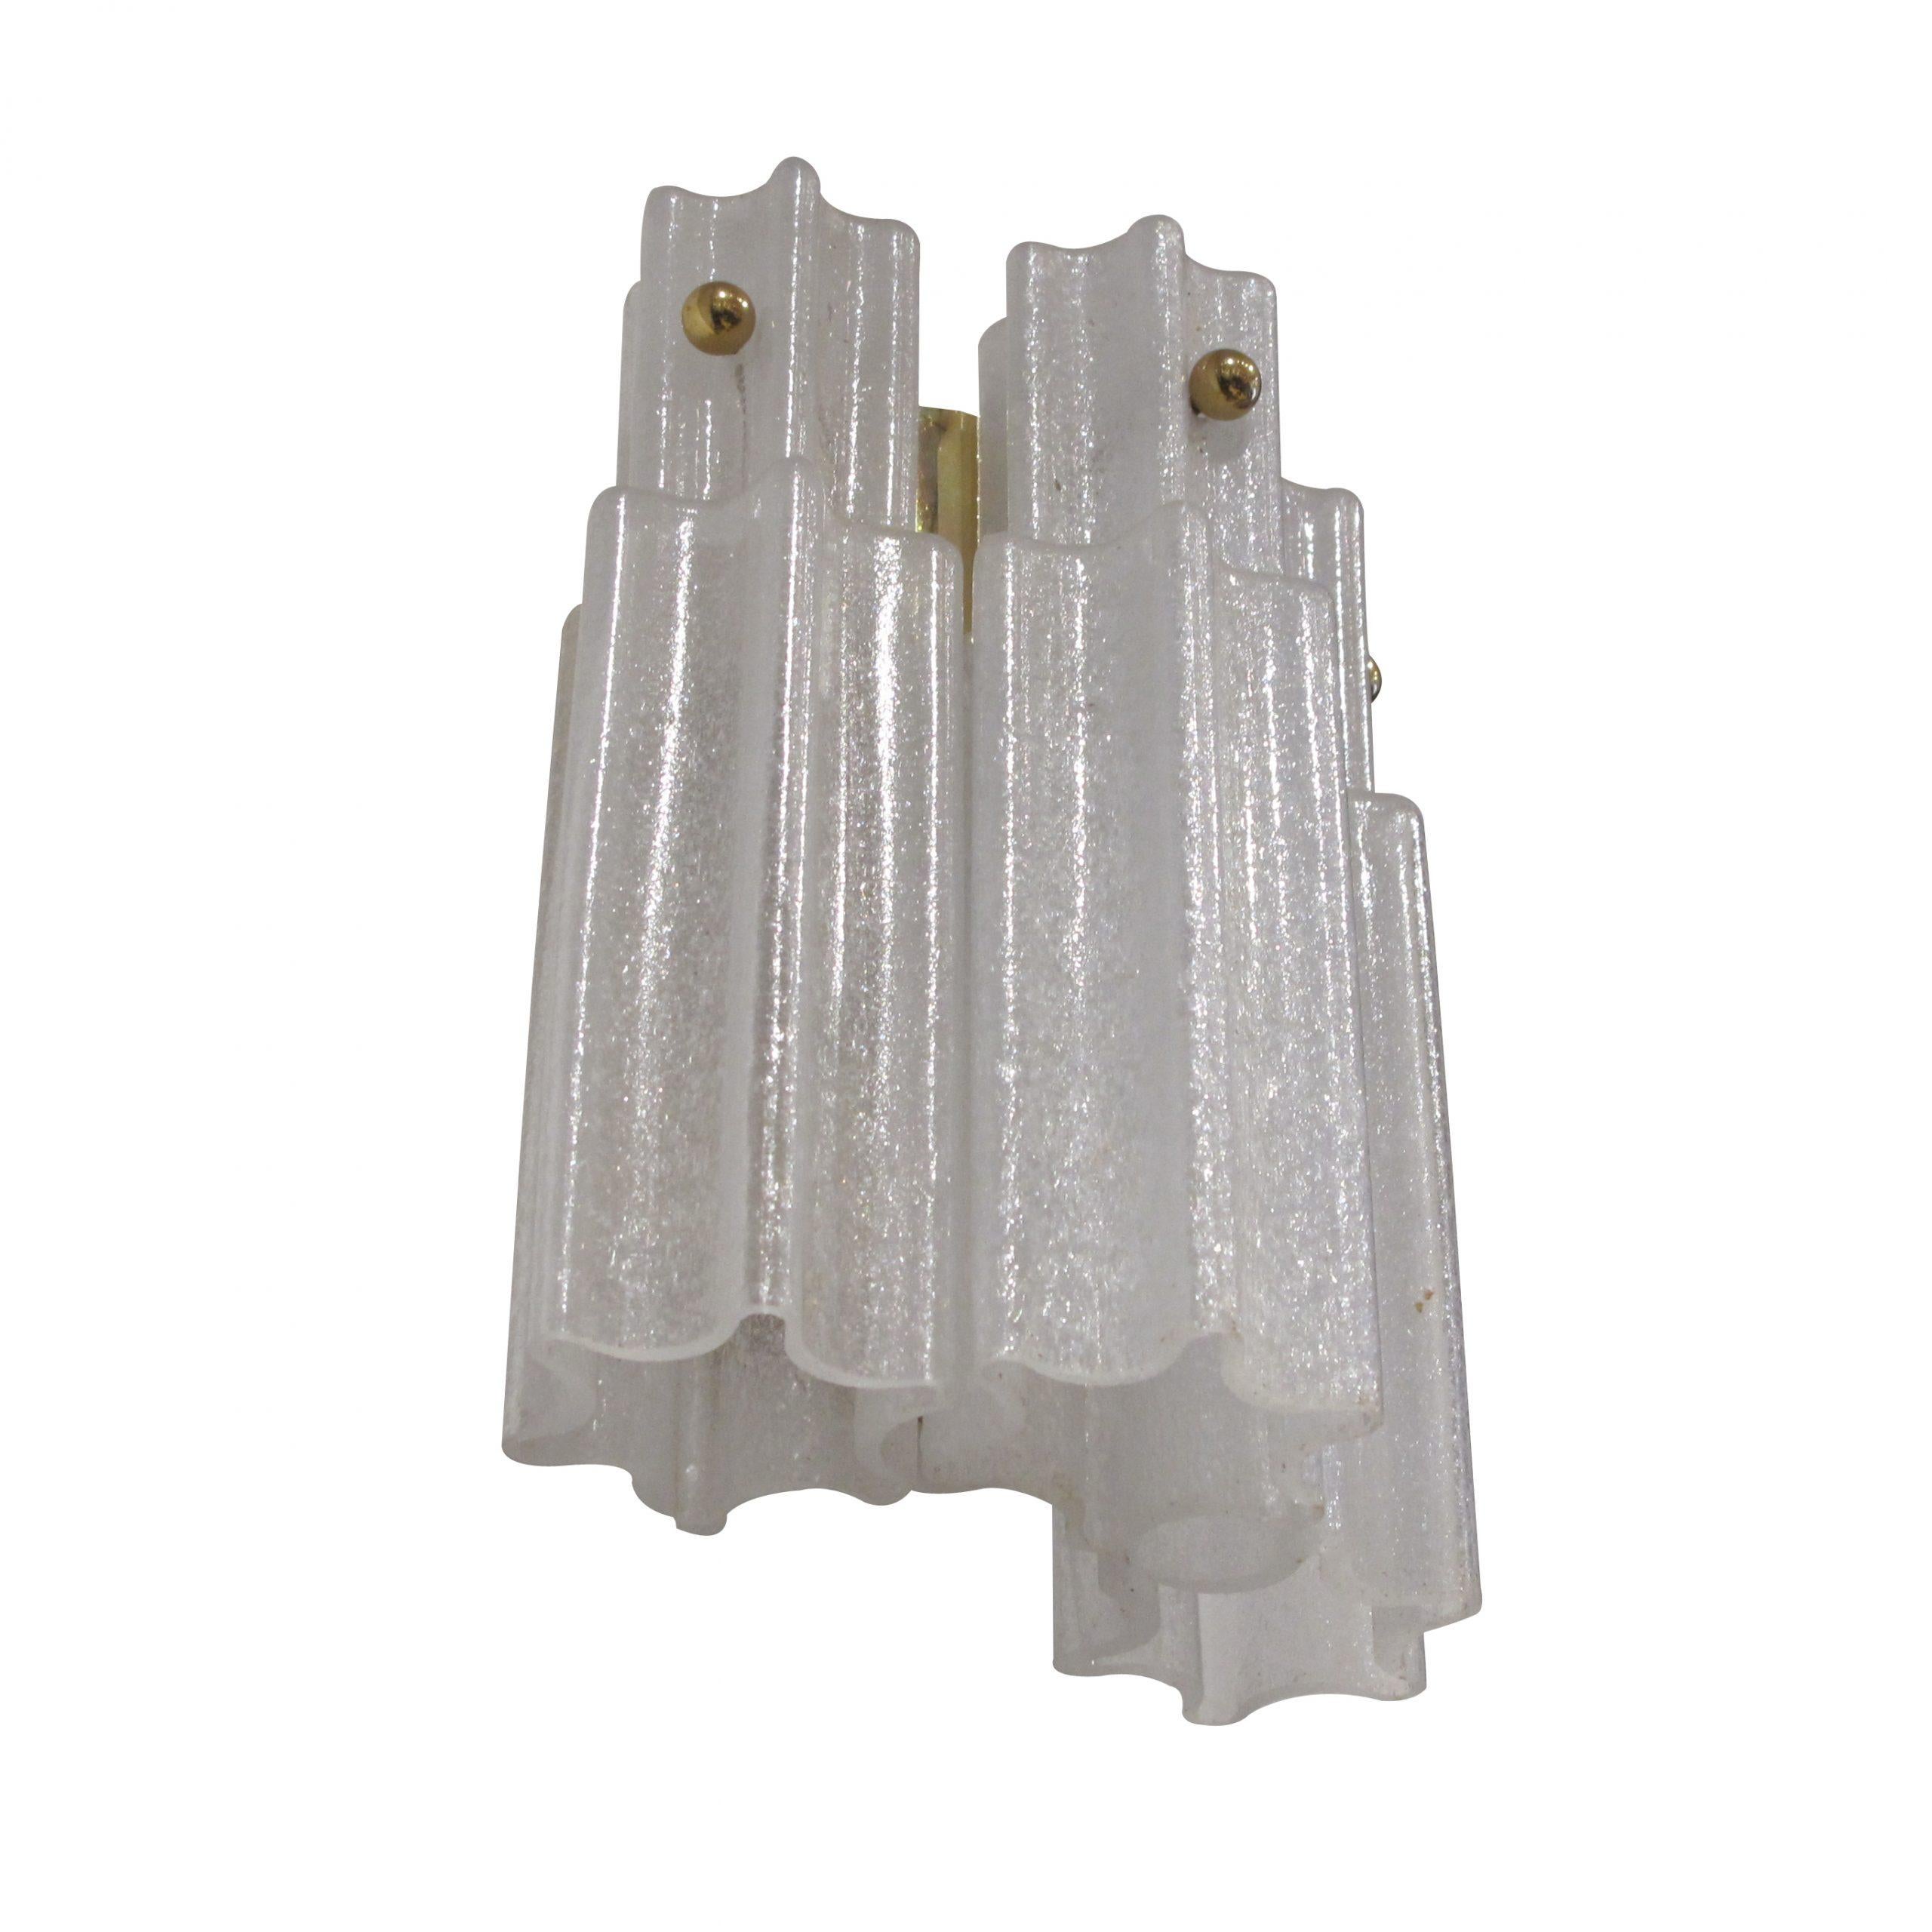 Other Pair of 1960S German Hand Blown Glass Wall Lights Sconces by Glashütte Limburg